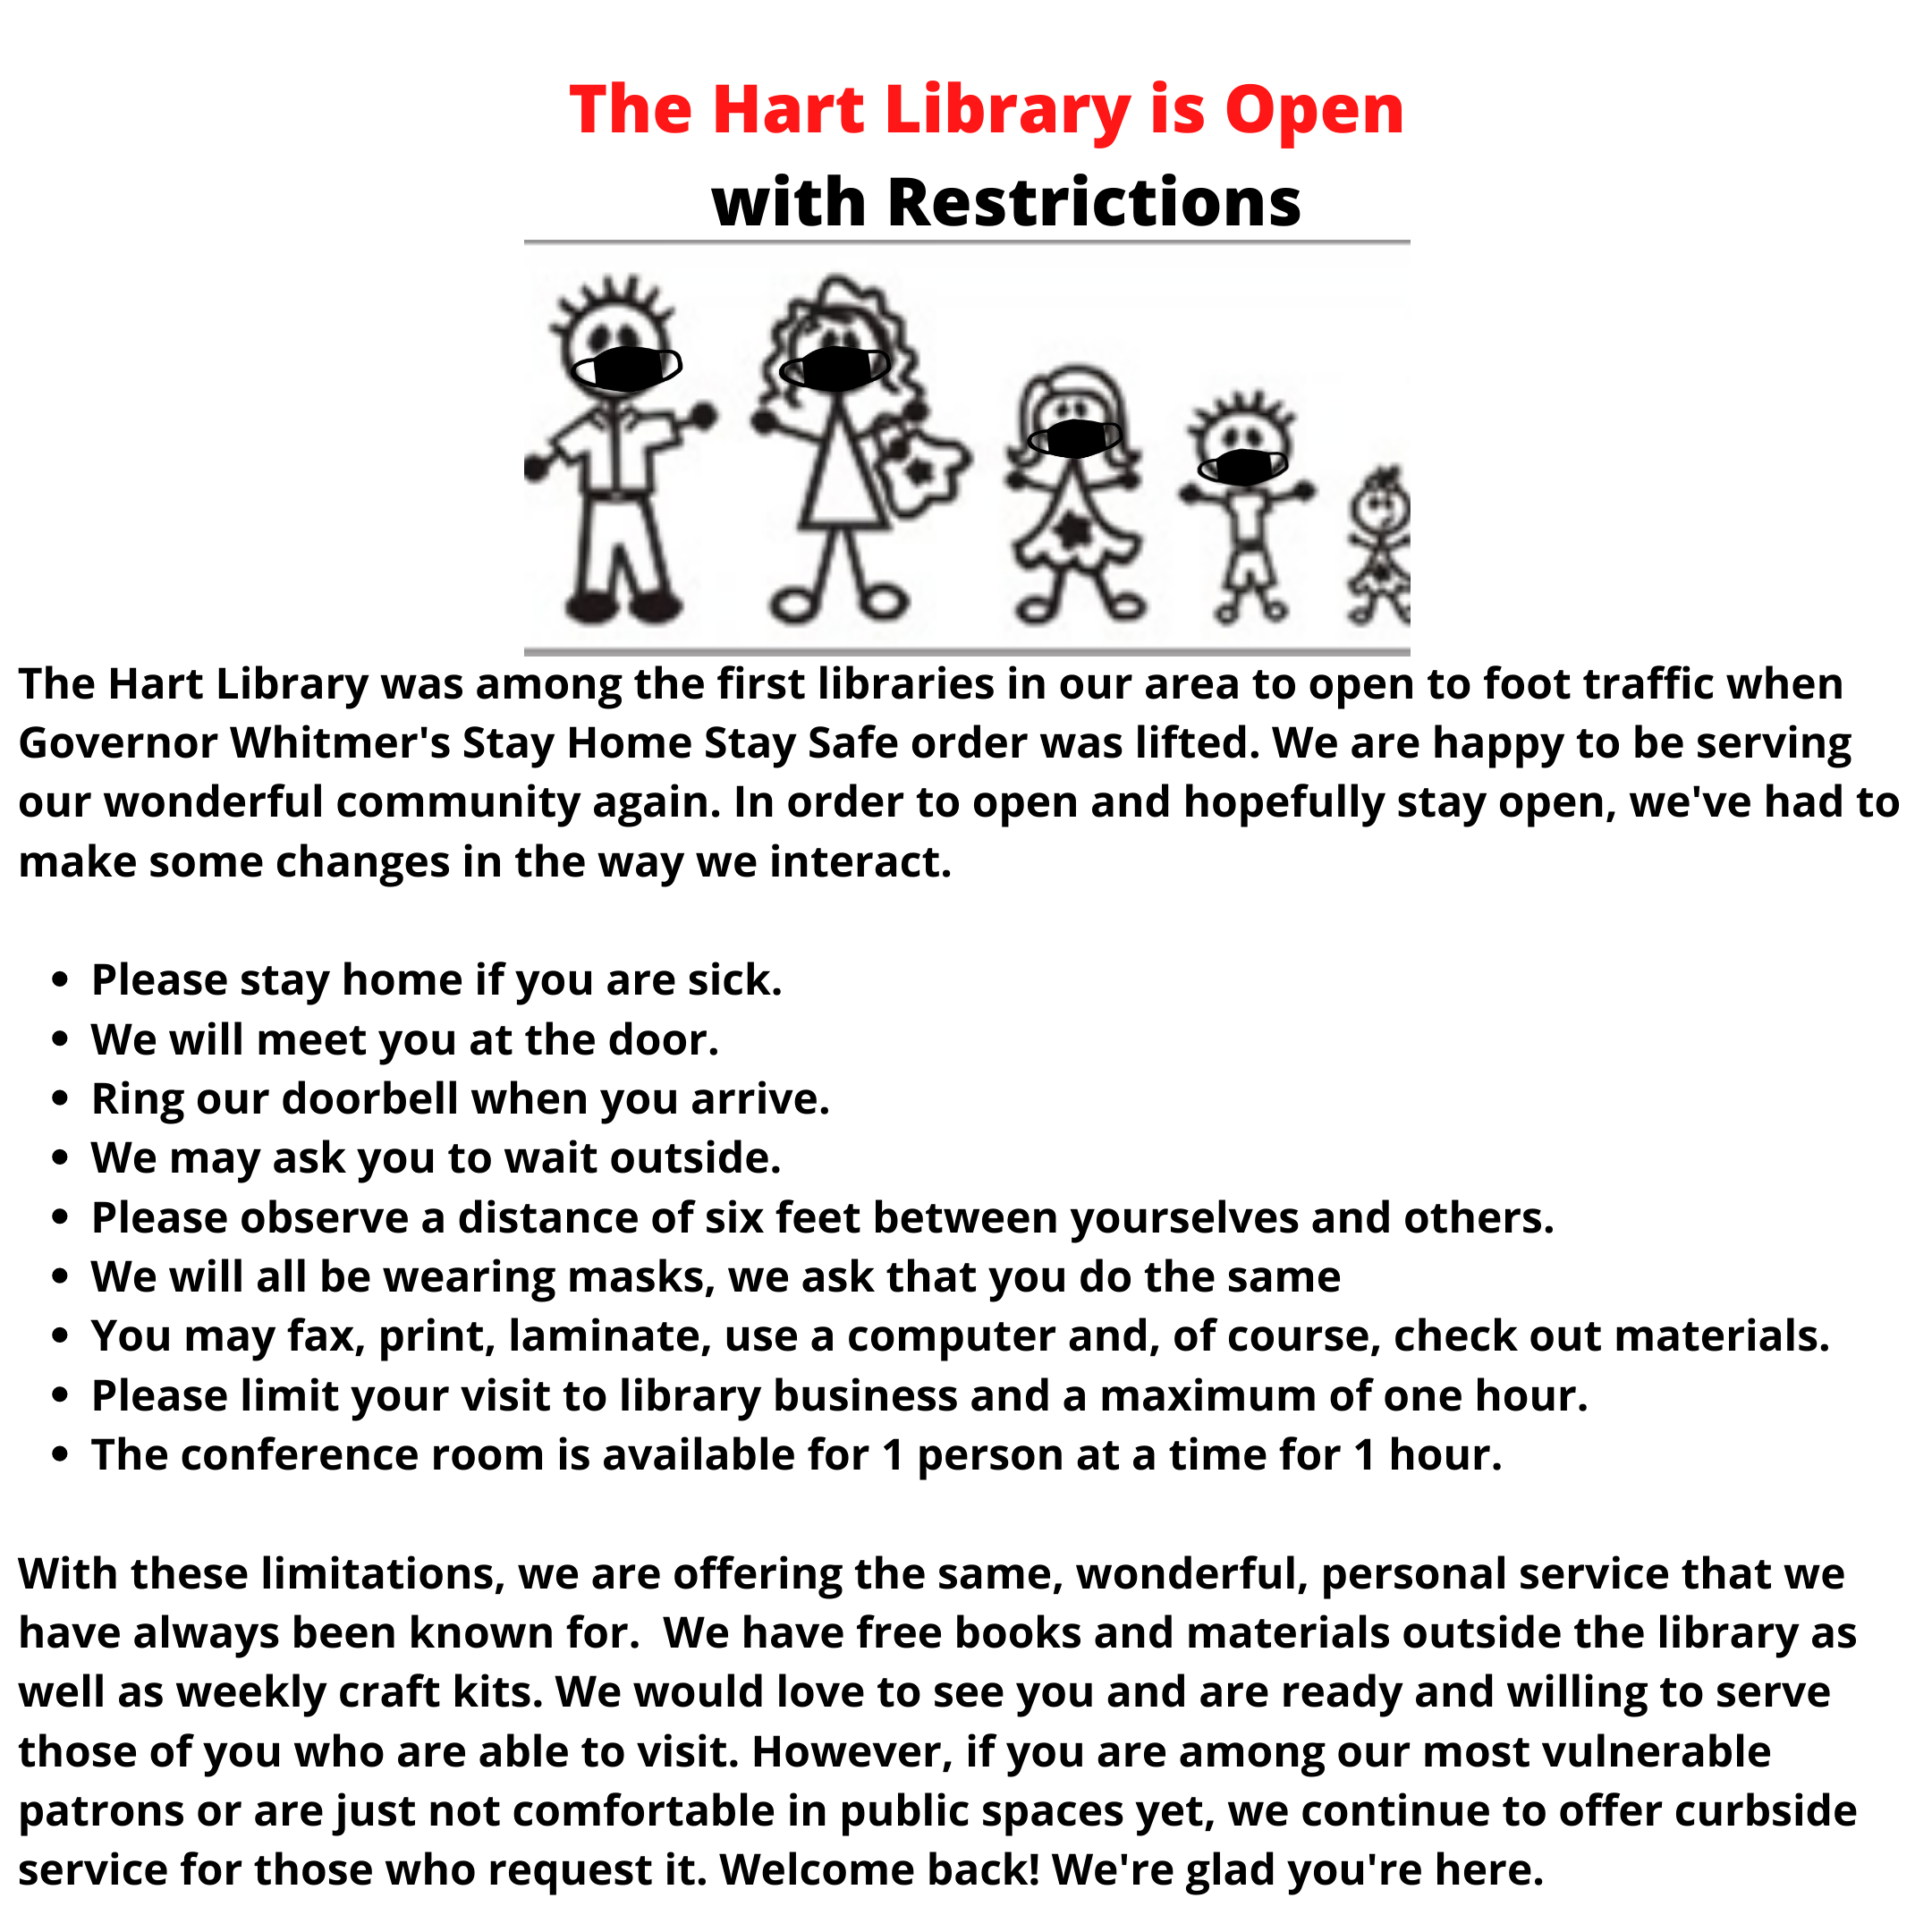 The Hart Library is Open with Restrictions (1).png